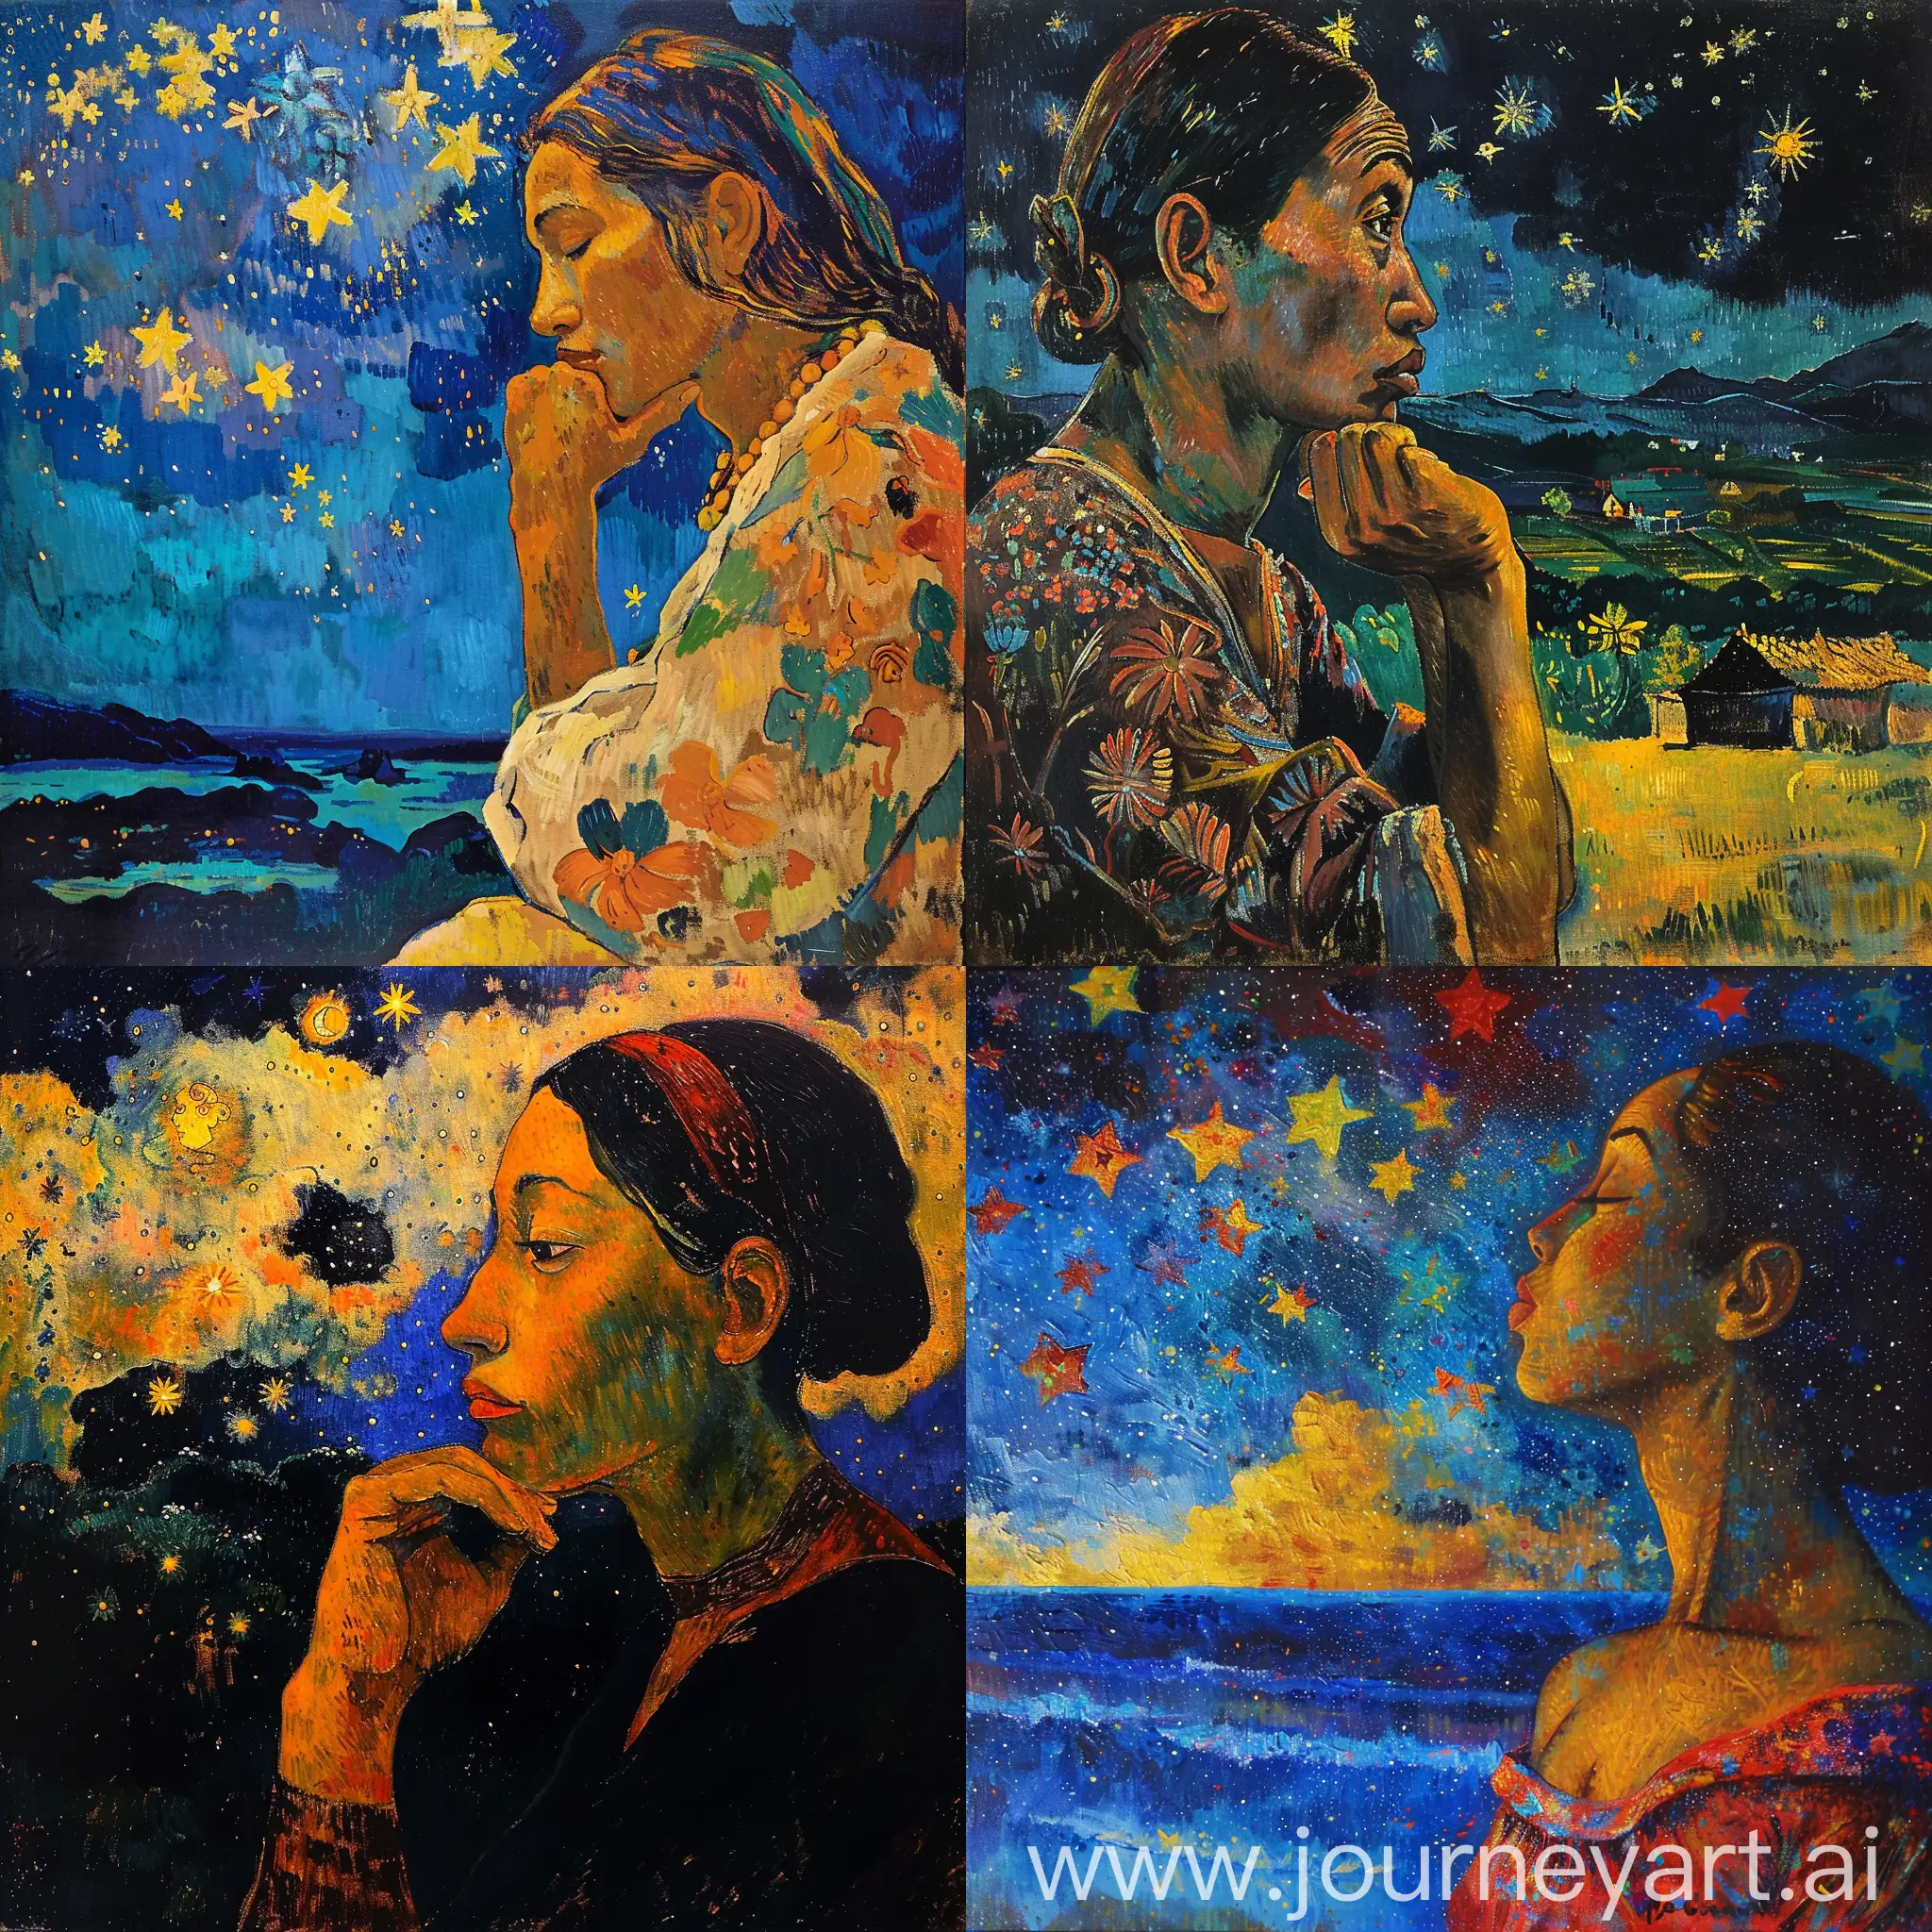 Contemplative-Woman-Gazing-at-the-Stars-Inspired-by-Paul-Gauguins-Style